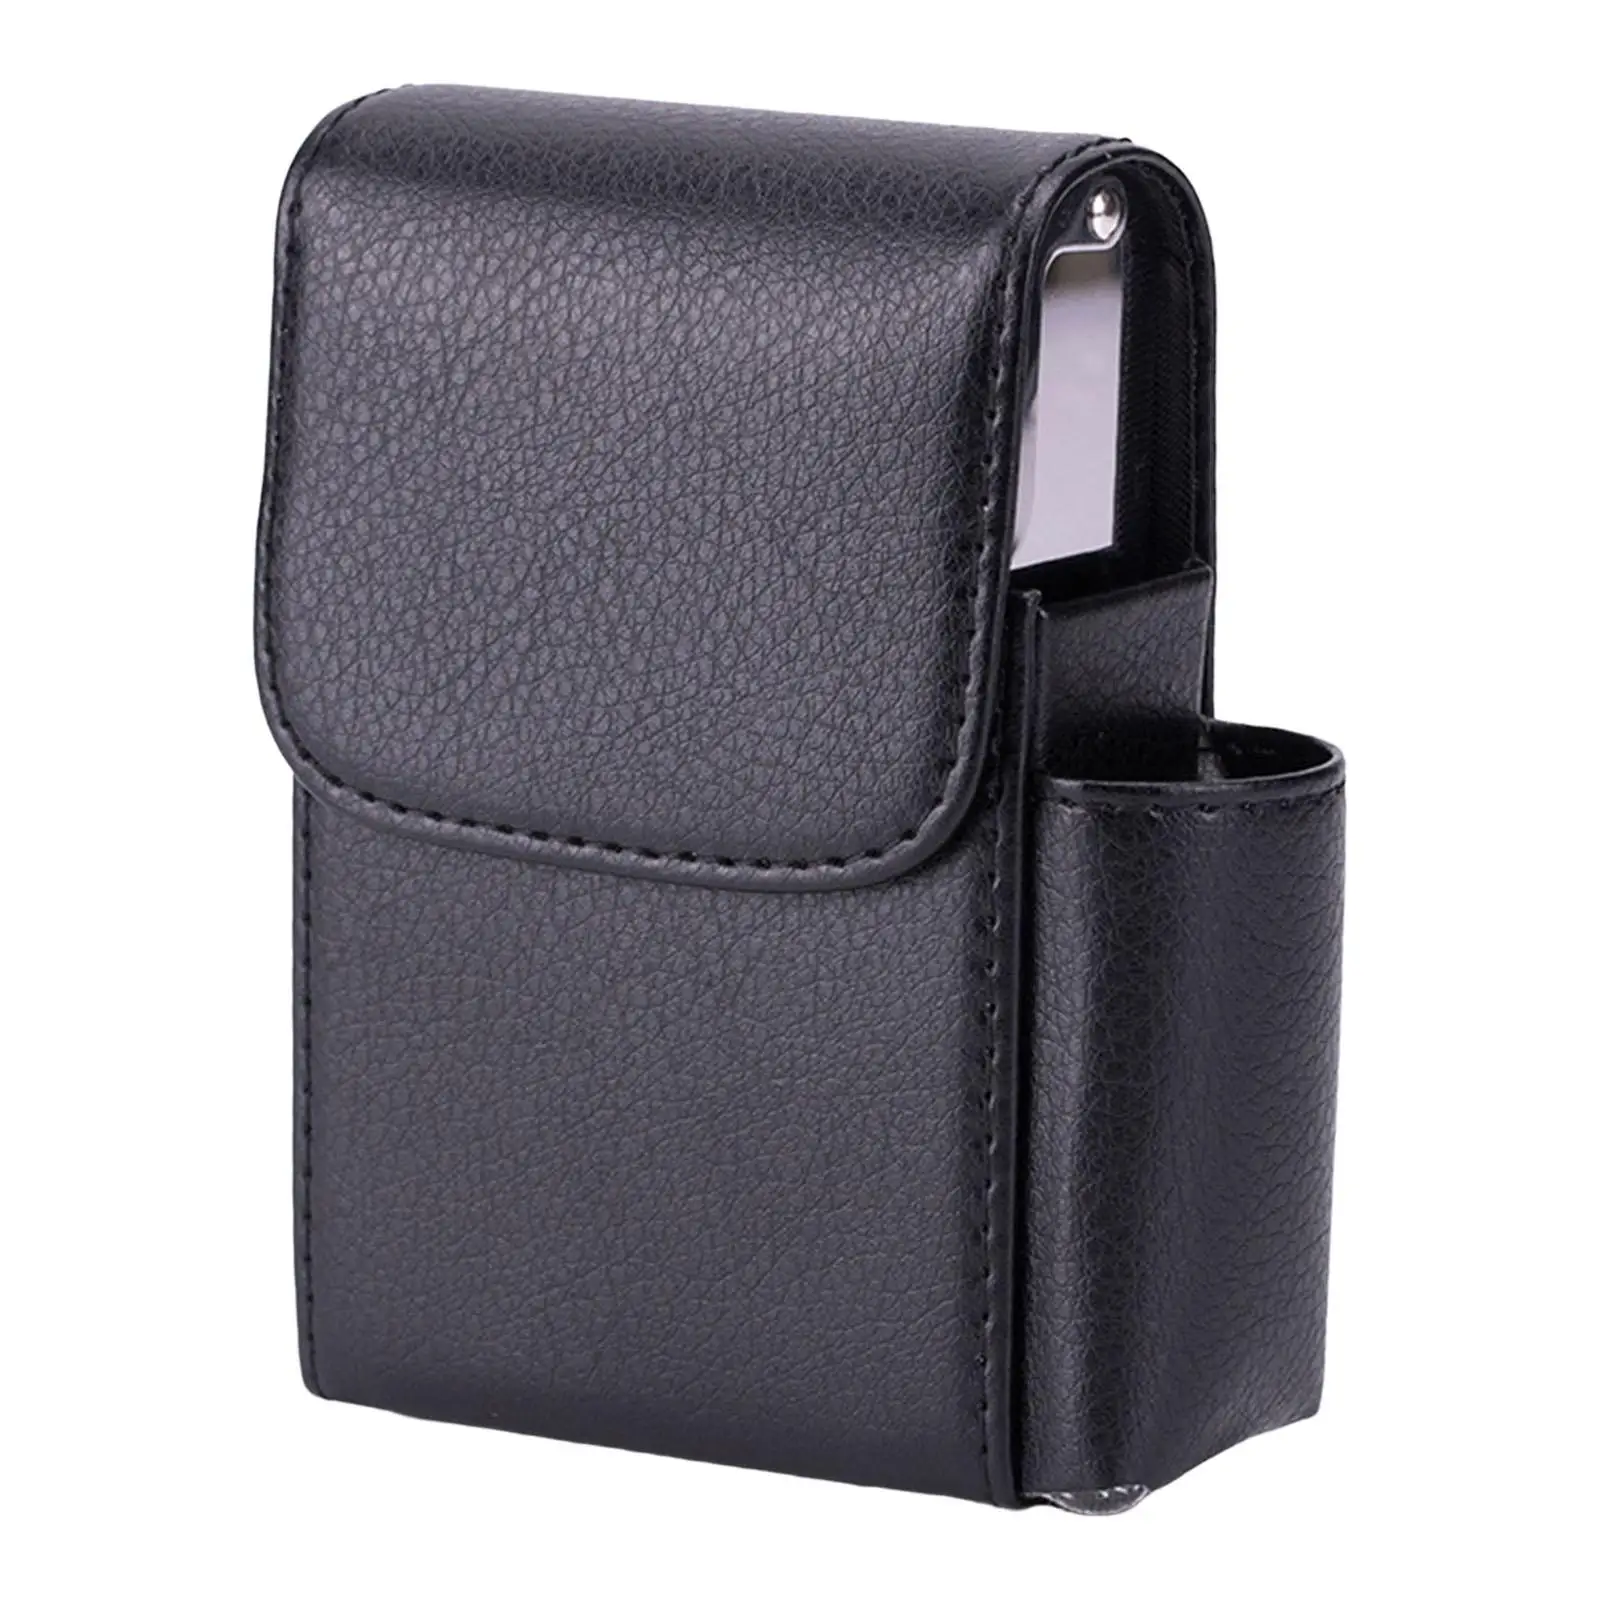 Cigarette Lighter Holder Case Hold 20 Cigarettes Tobacco Pouch Accessories Cigar Box for 20 Cigarettes Office Gifts Man Indoor